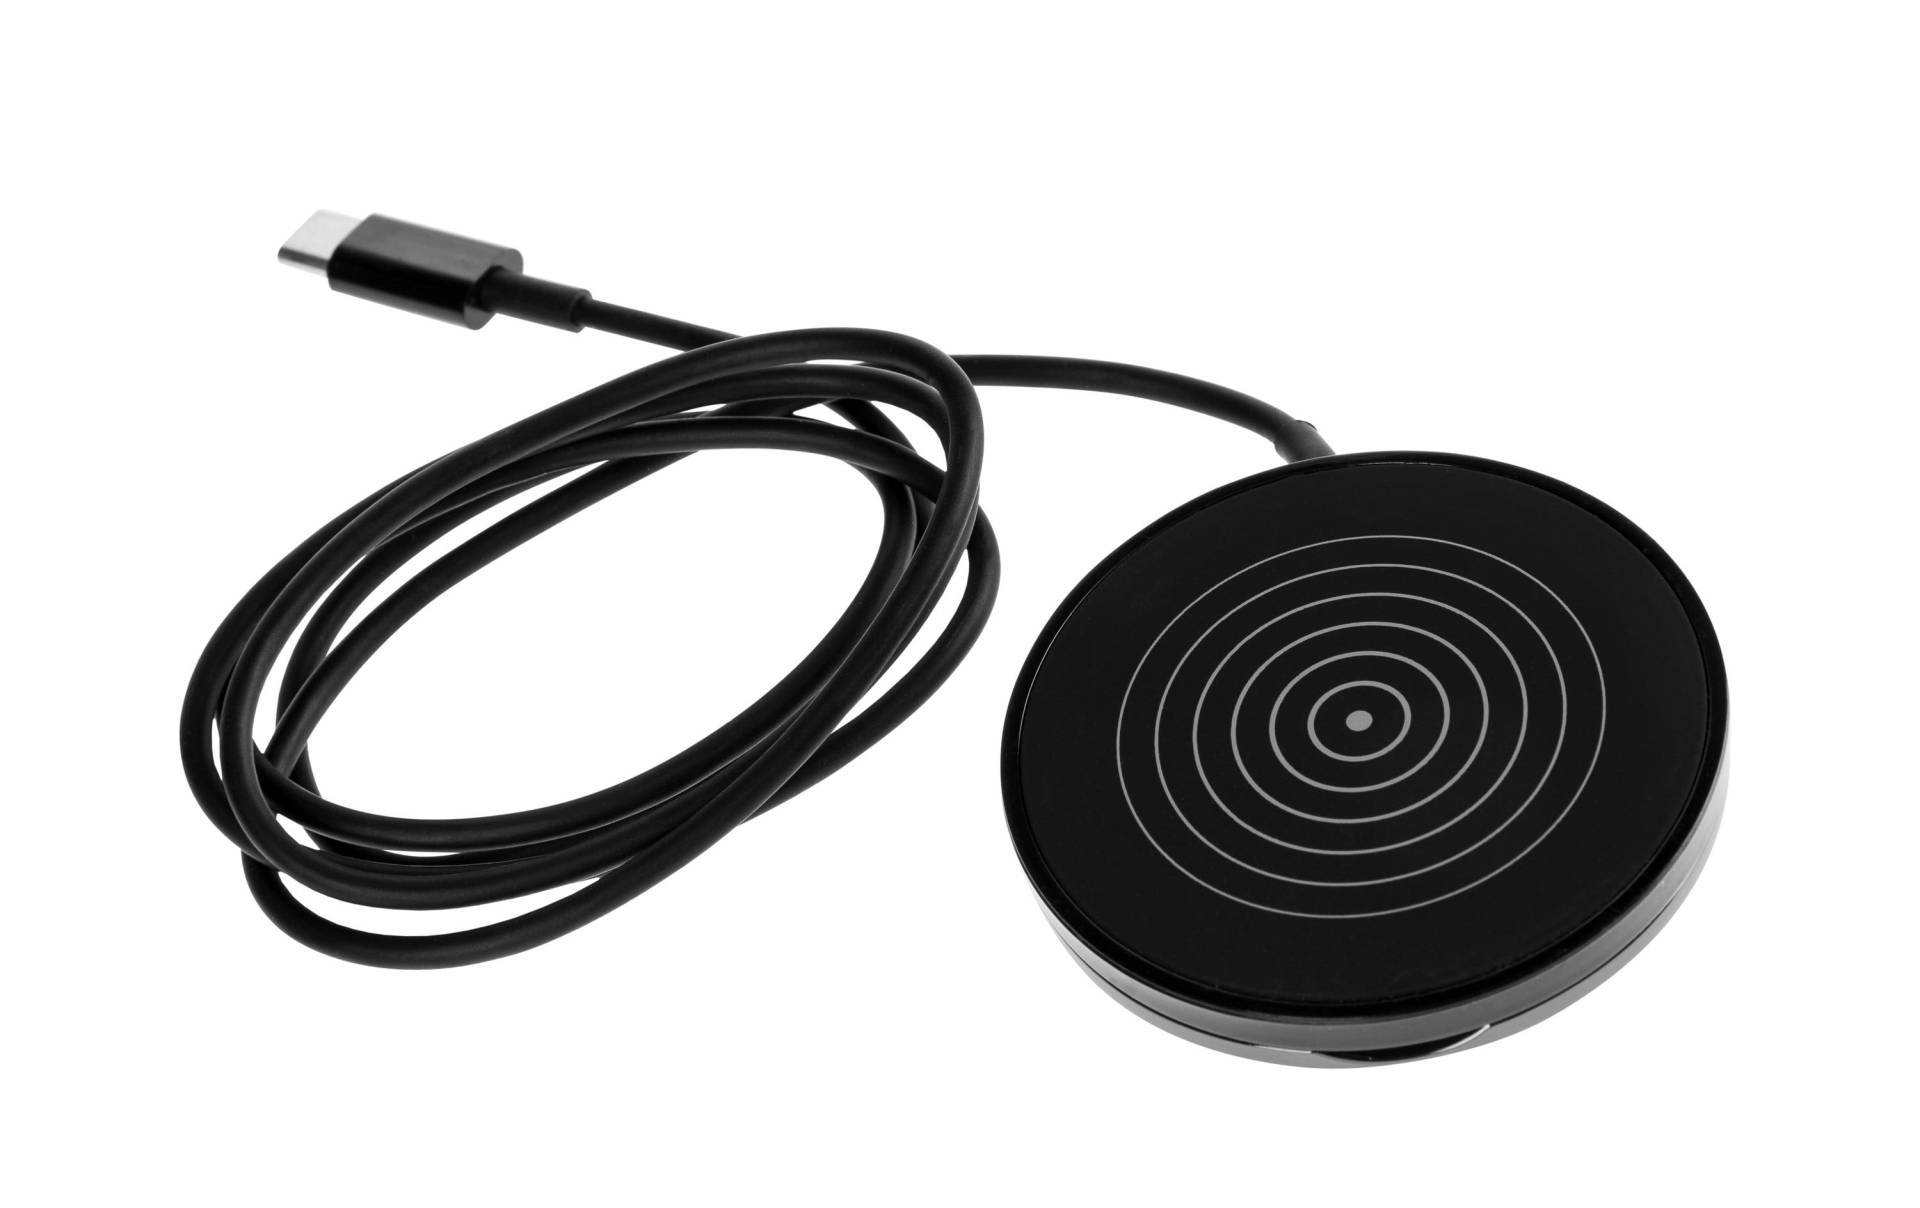 onit Wireless Charger »Magnetic 15W« von onit